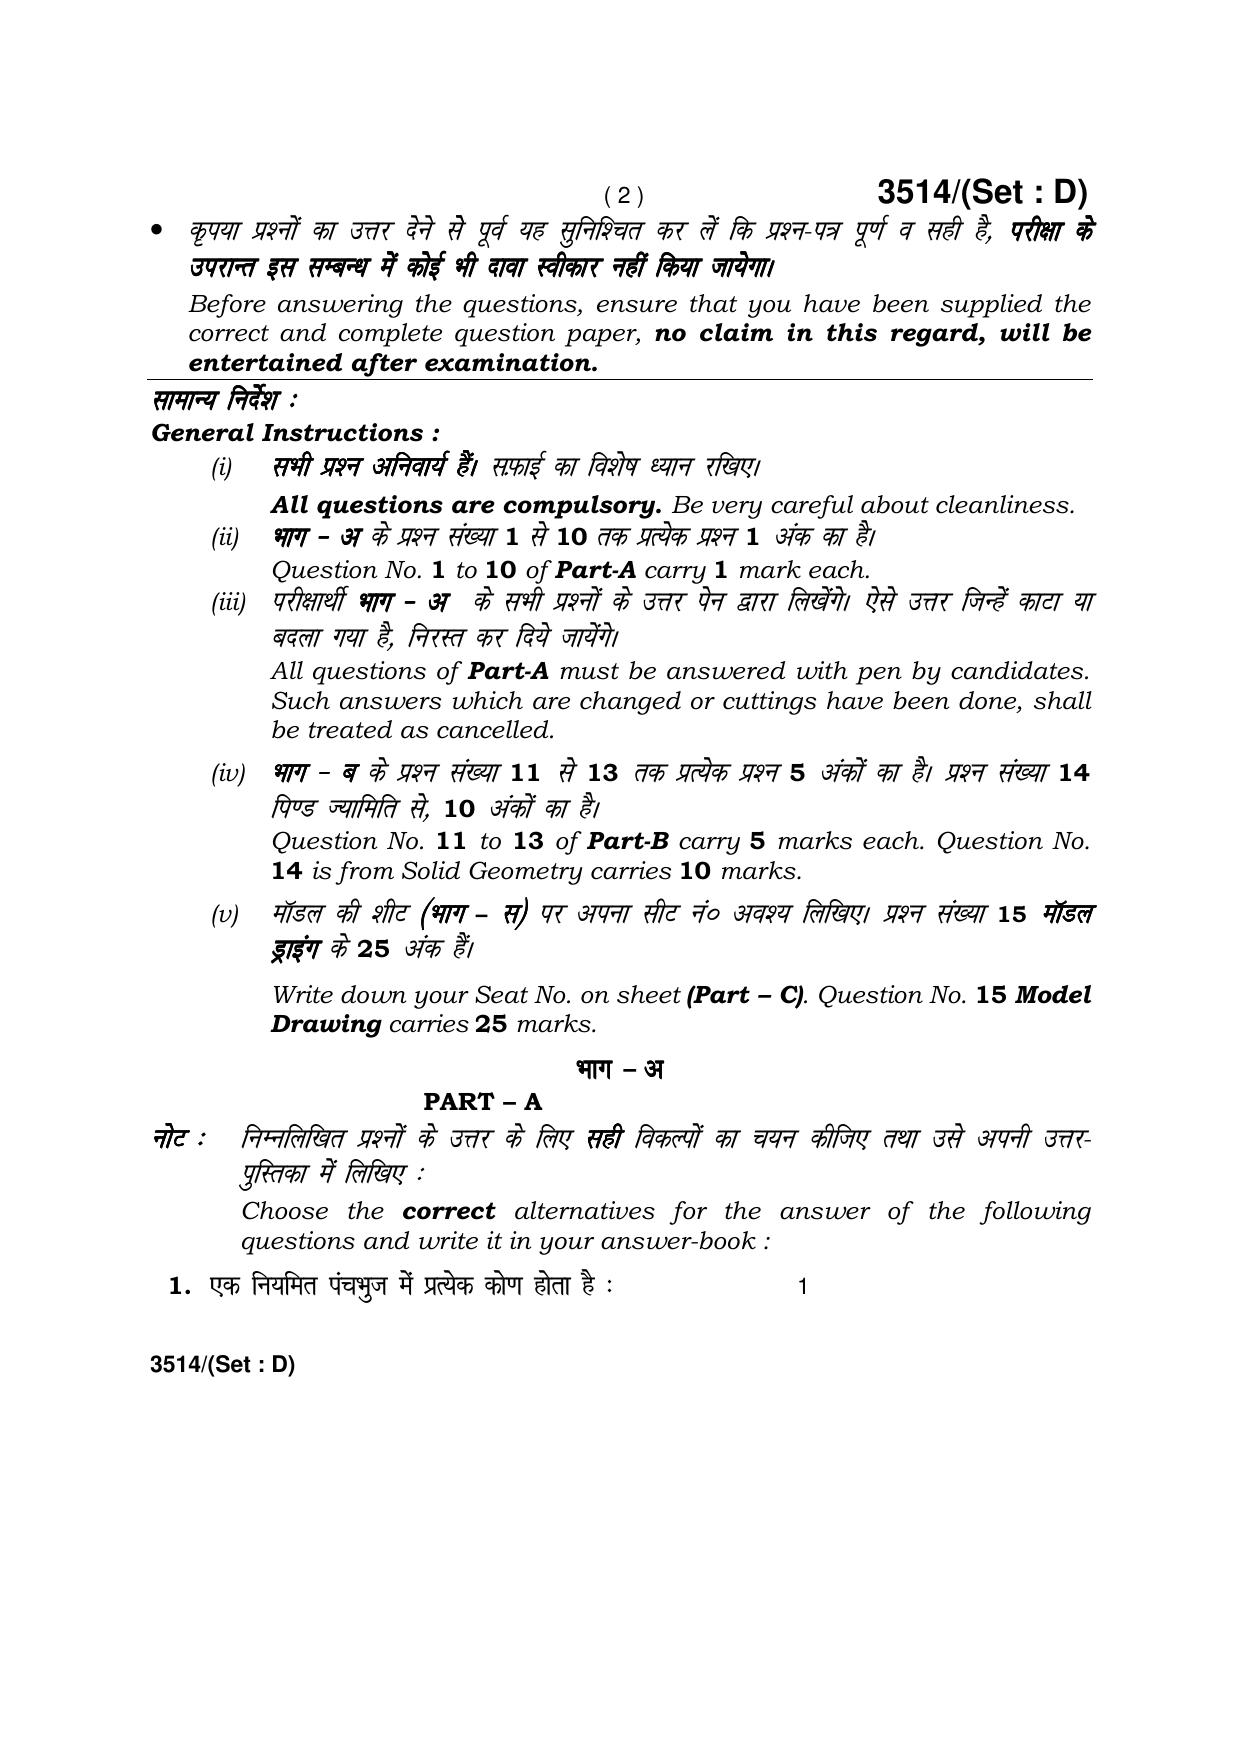 Haryana Board HBSE Class 10 Drawing -D 2018 Question Paper - Page 2